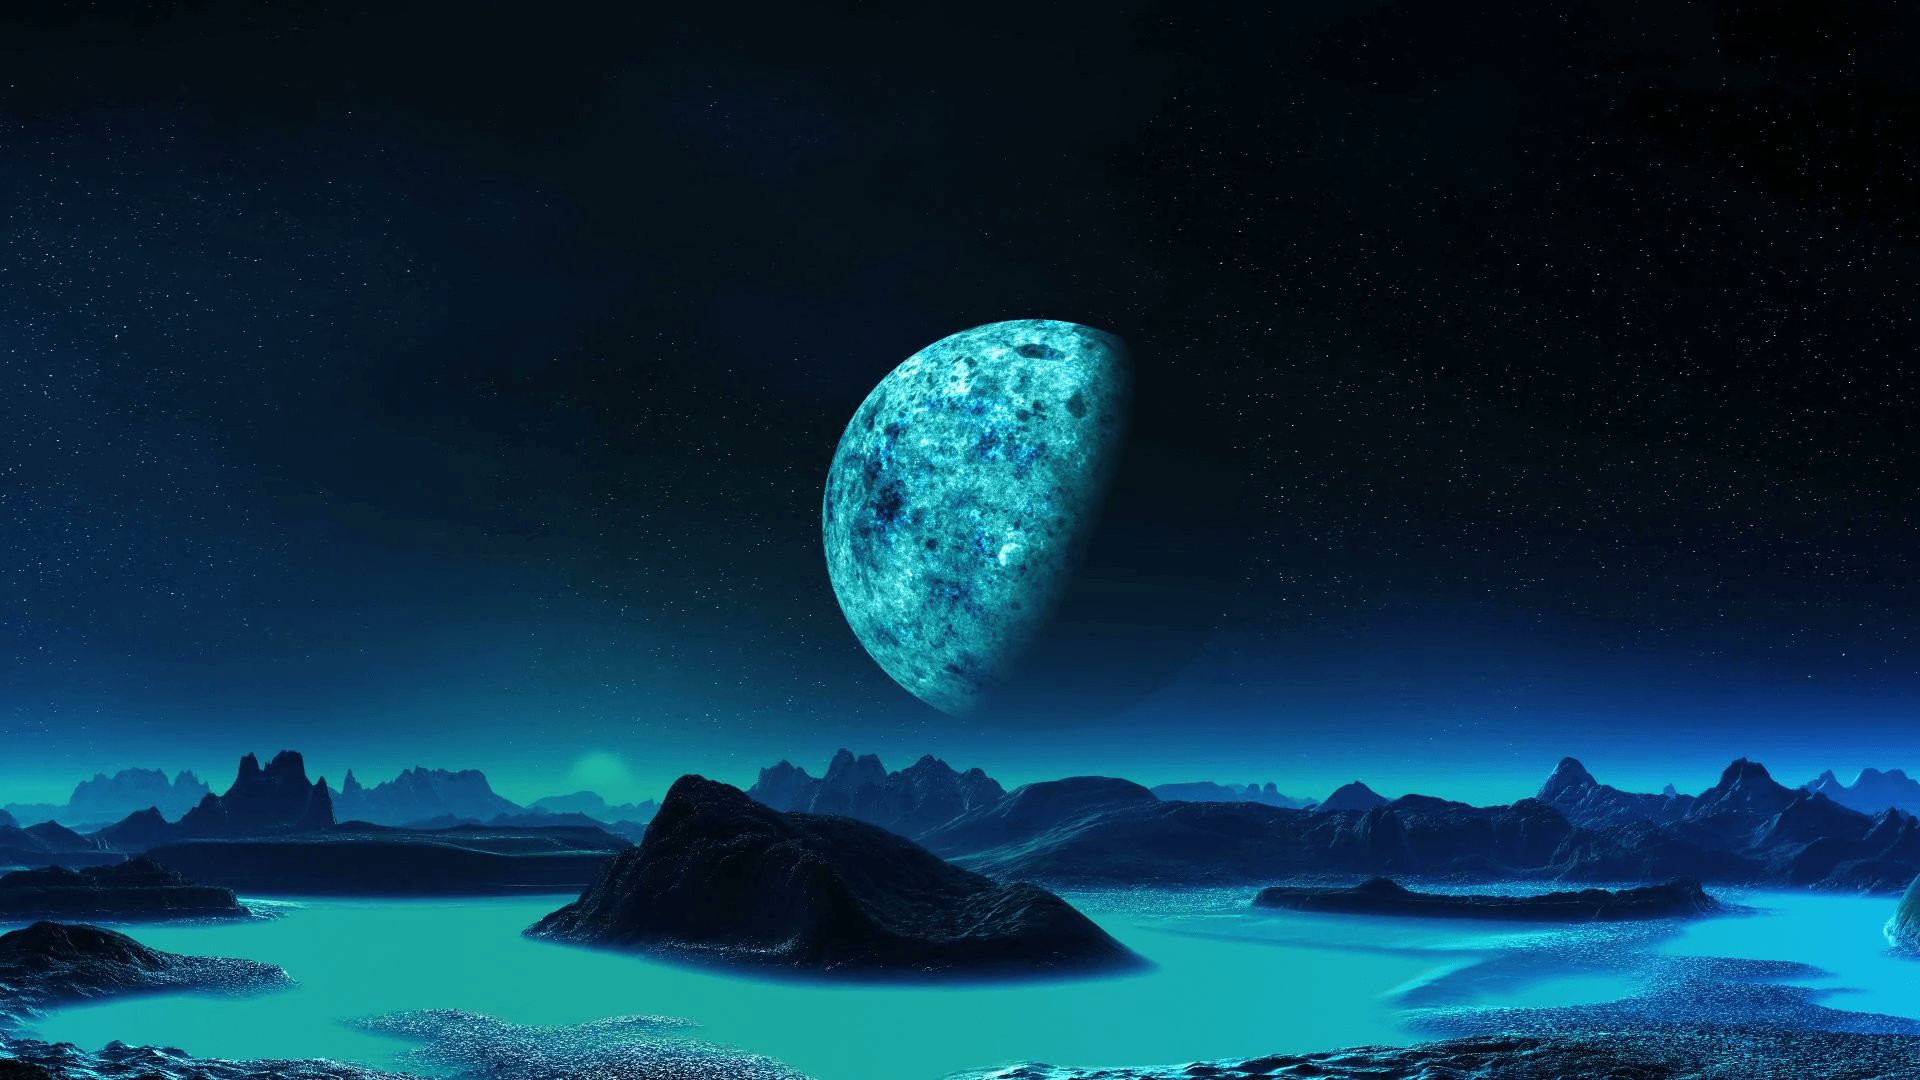 Blue Moon Rise On An Alien Planet. Mountain and the hills are among the glowing blue mist. Due to the horizon rises a bright blue moon. In the dark